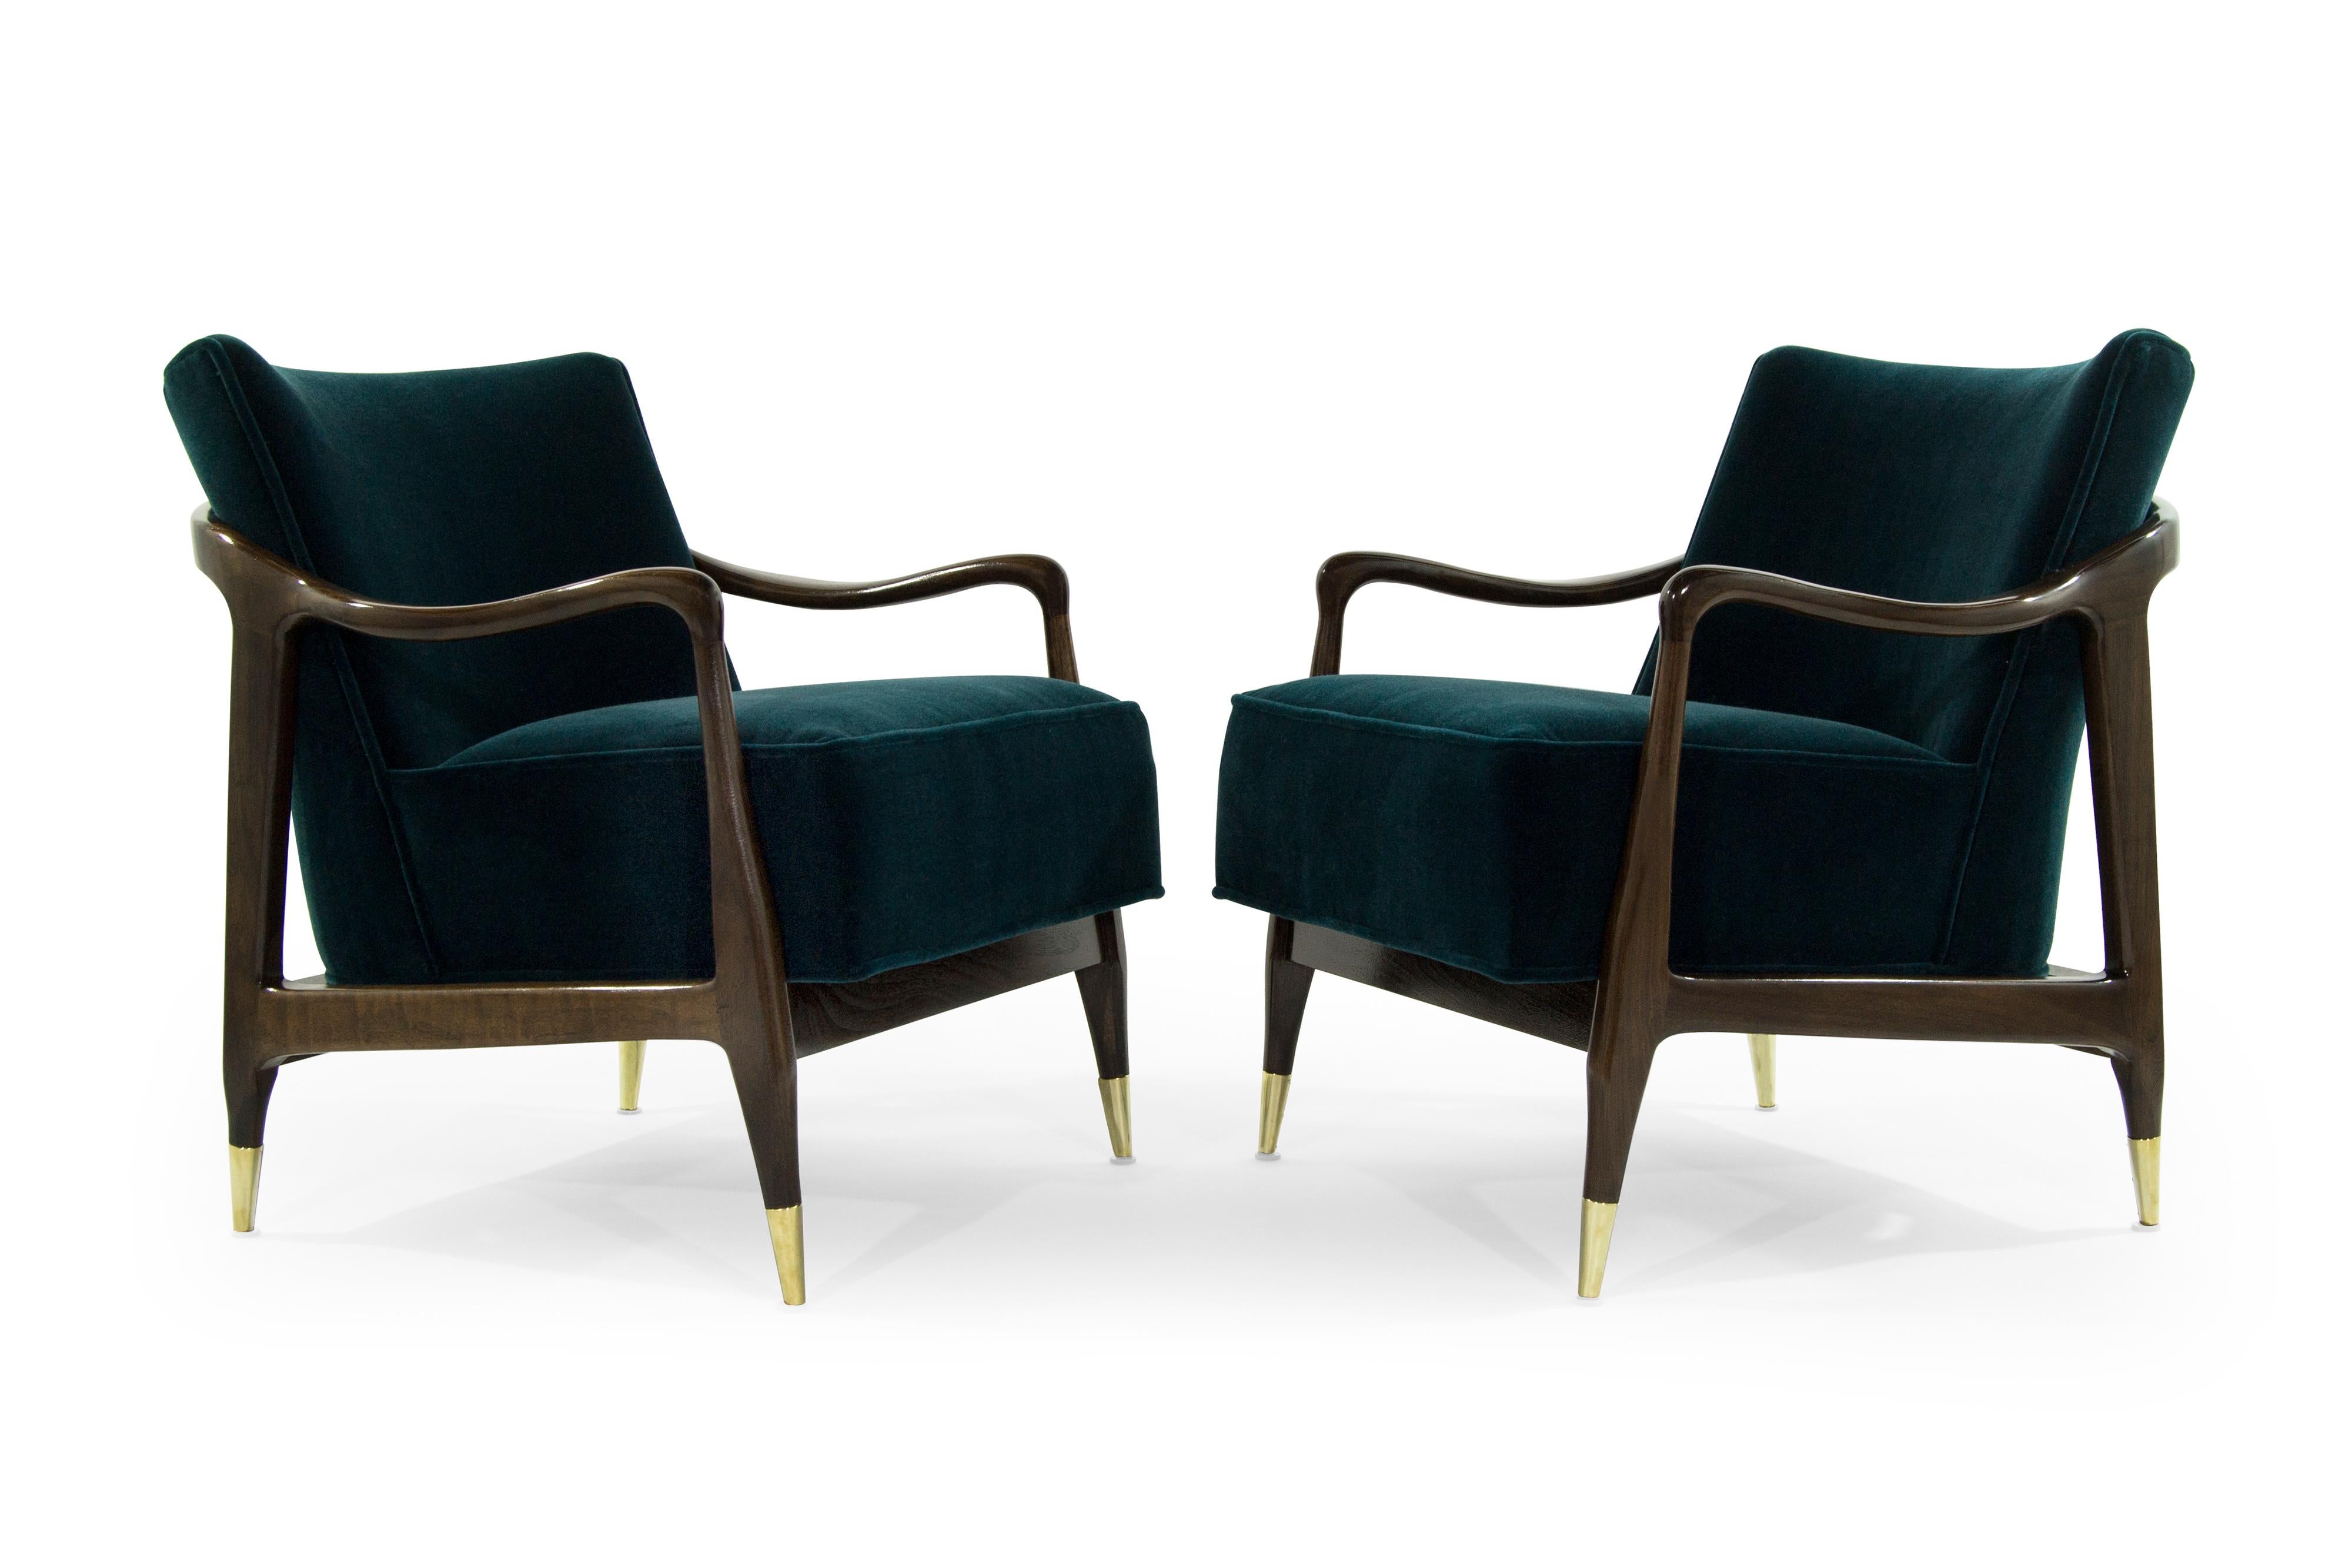 Exquisite pair of Mid-Century Modern lounge chairs featuring sculptural walnut frames, which have been expertly restored to their original integrity. They boast handcut high grade foam, as well as hand polished brass sabots.
They have been recovered